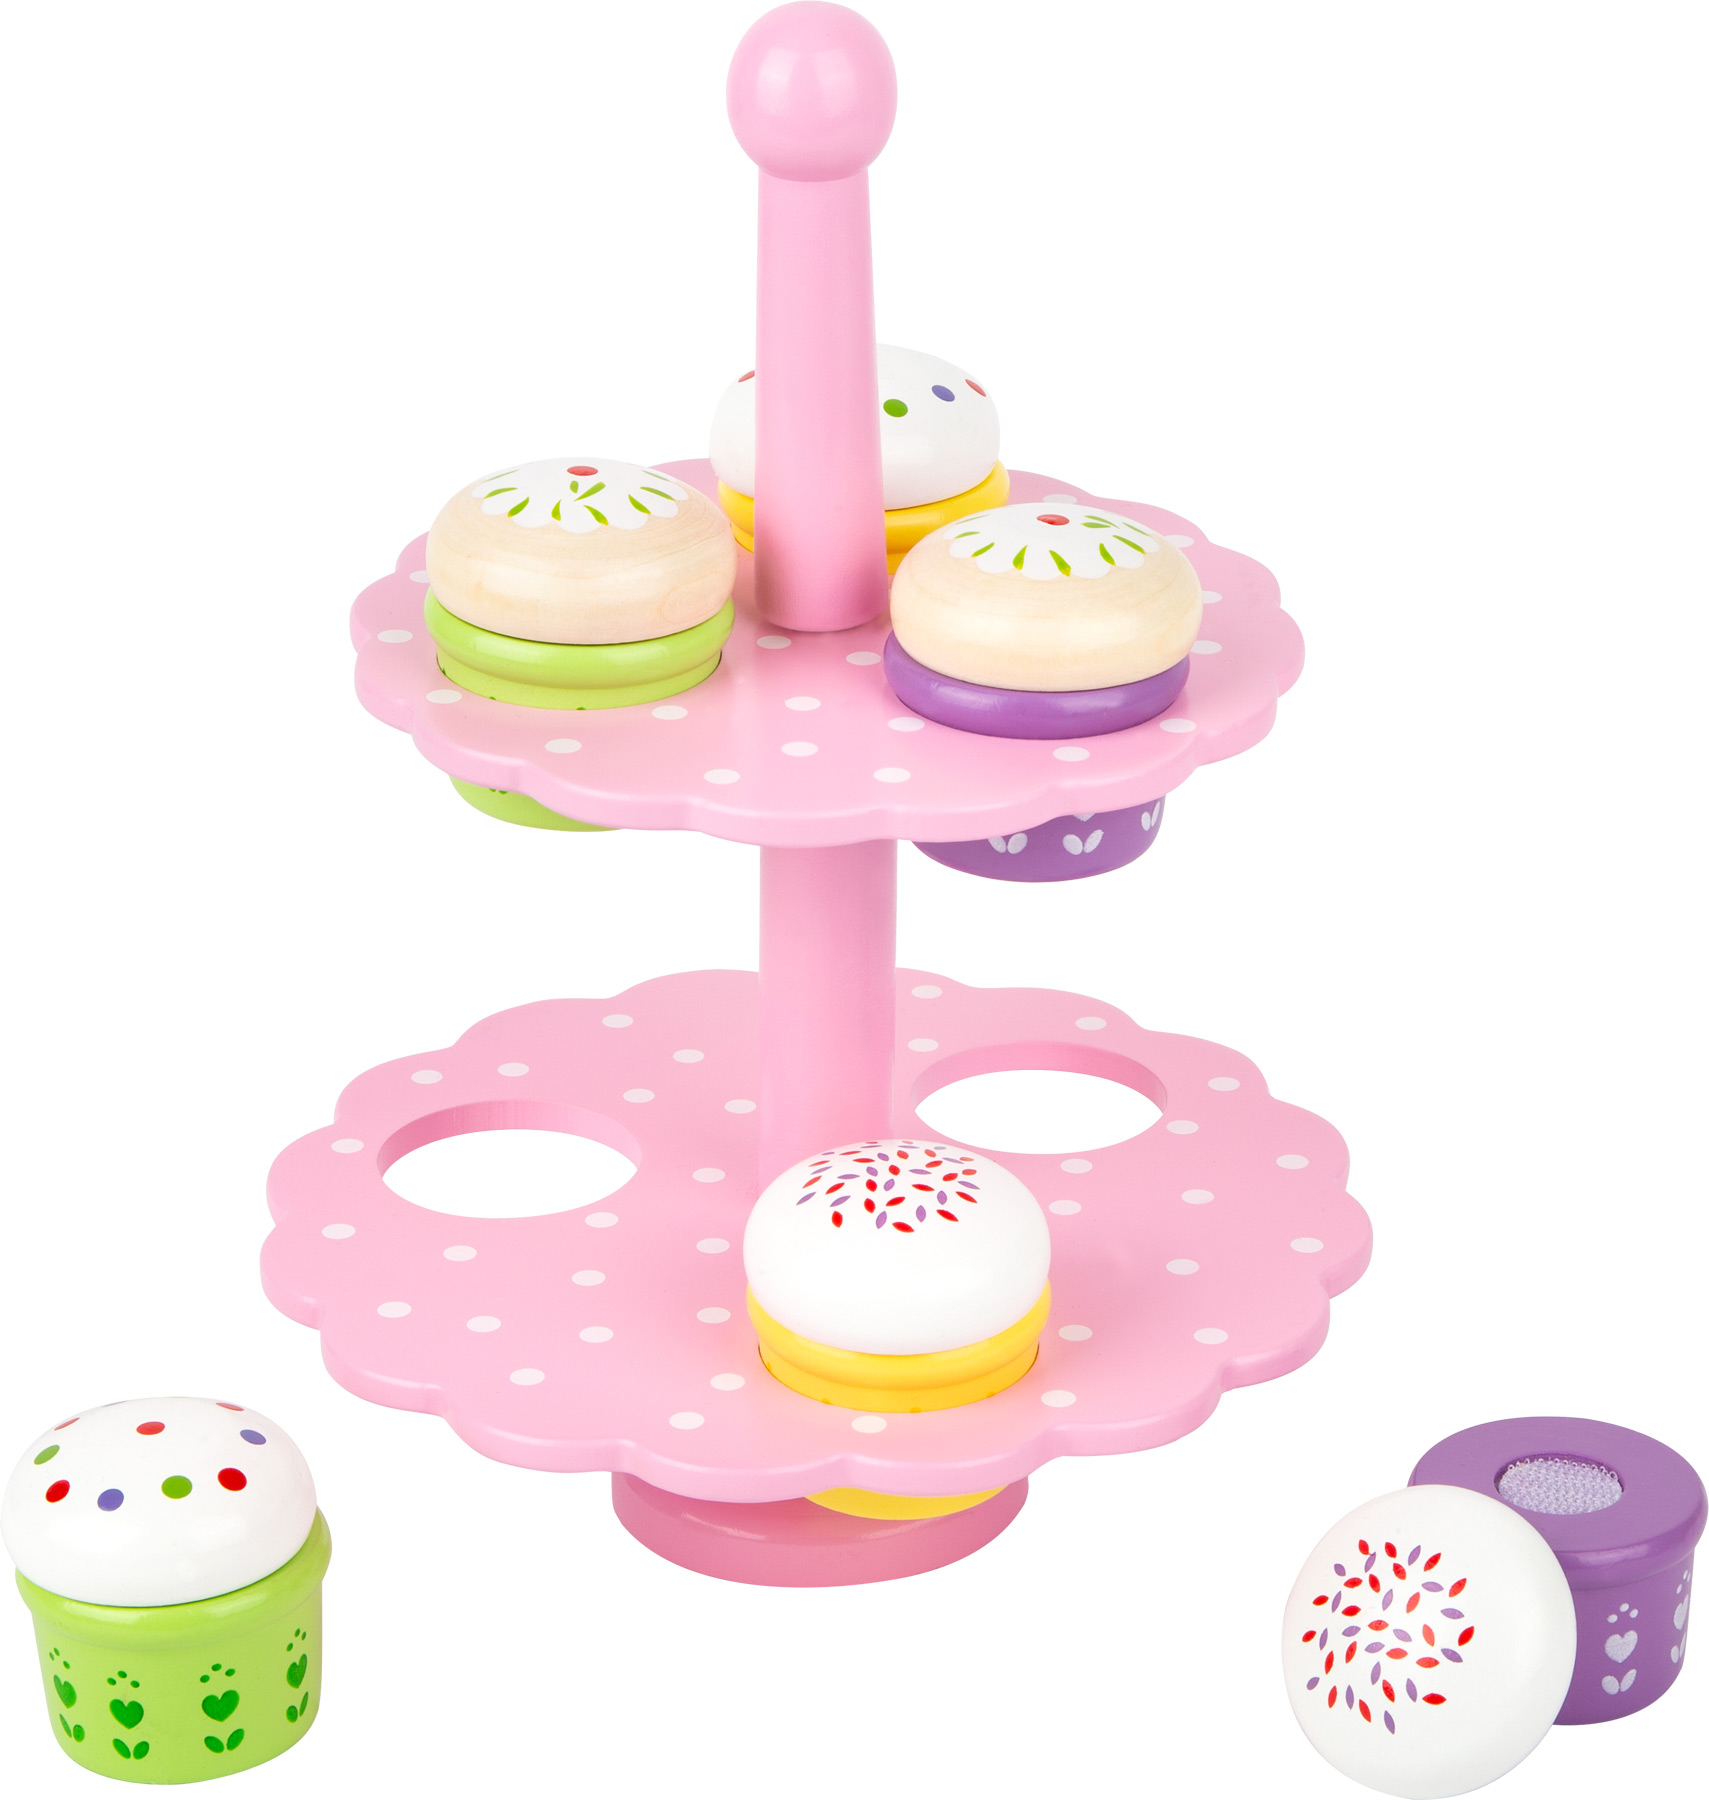 small foot company - Etagere für Muffins und Cupcakes